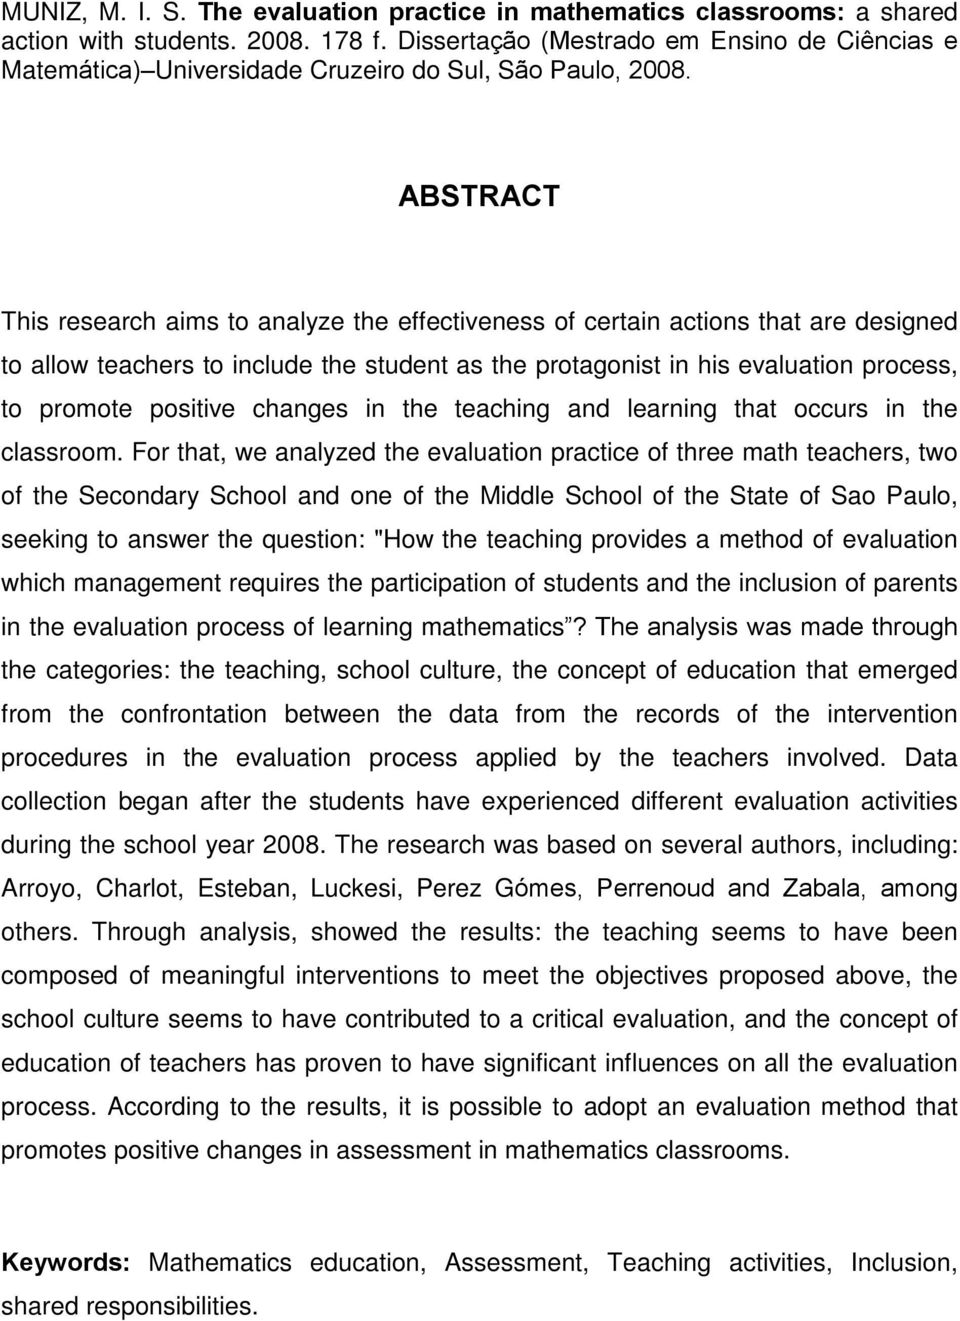 ABSTRACT This research aims to analyze the effectiveness of certain actions that are designed to allow teachers to include the student as the protagonist in his evaluation process, to promote